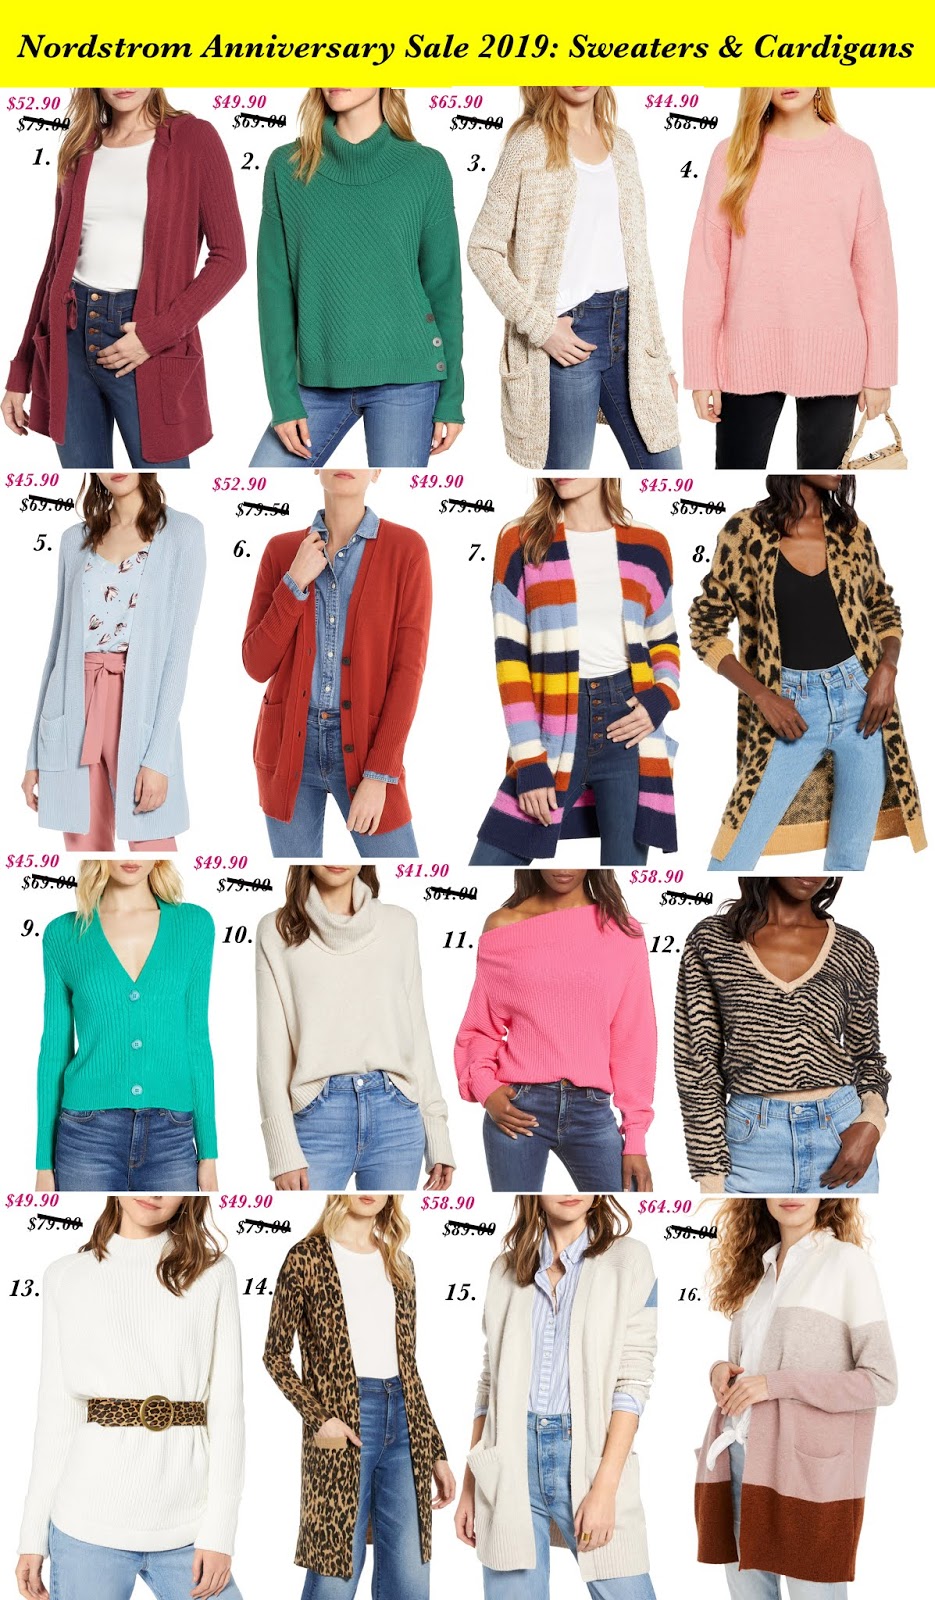 Nordstrom Anniversary Sale 2019: Favorites in Every Category for Women + a Giveaway!! - Something Delightful Blog